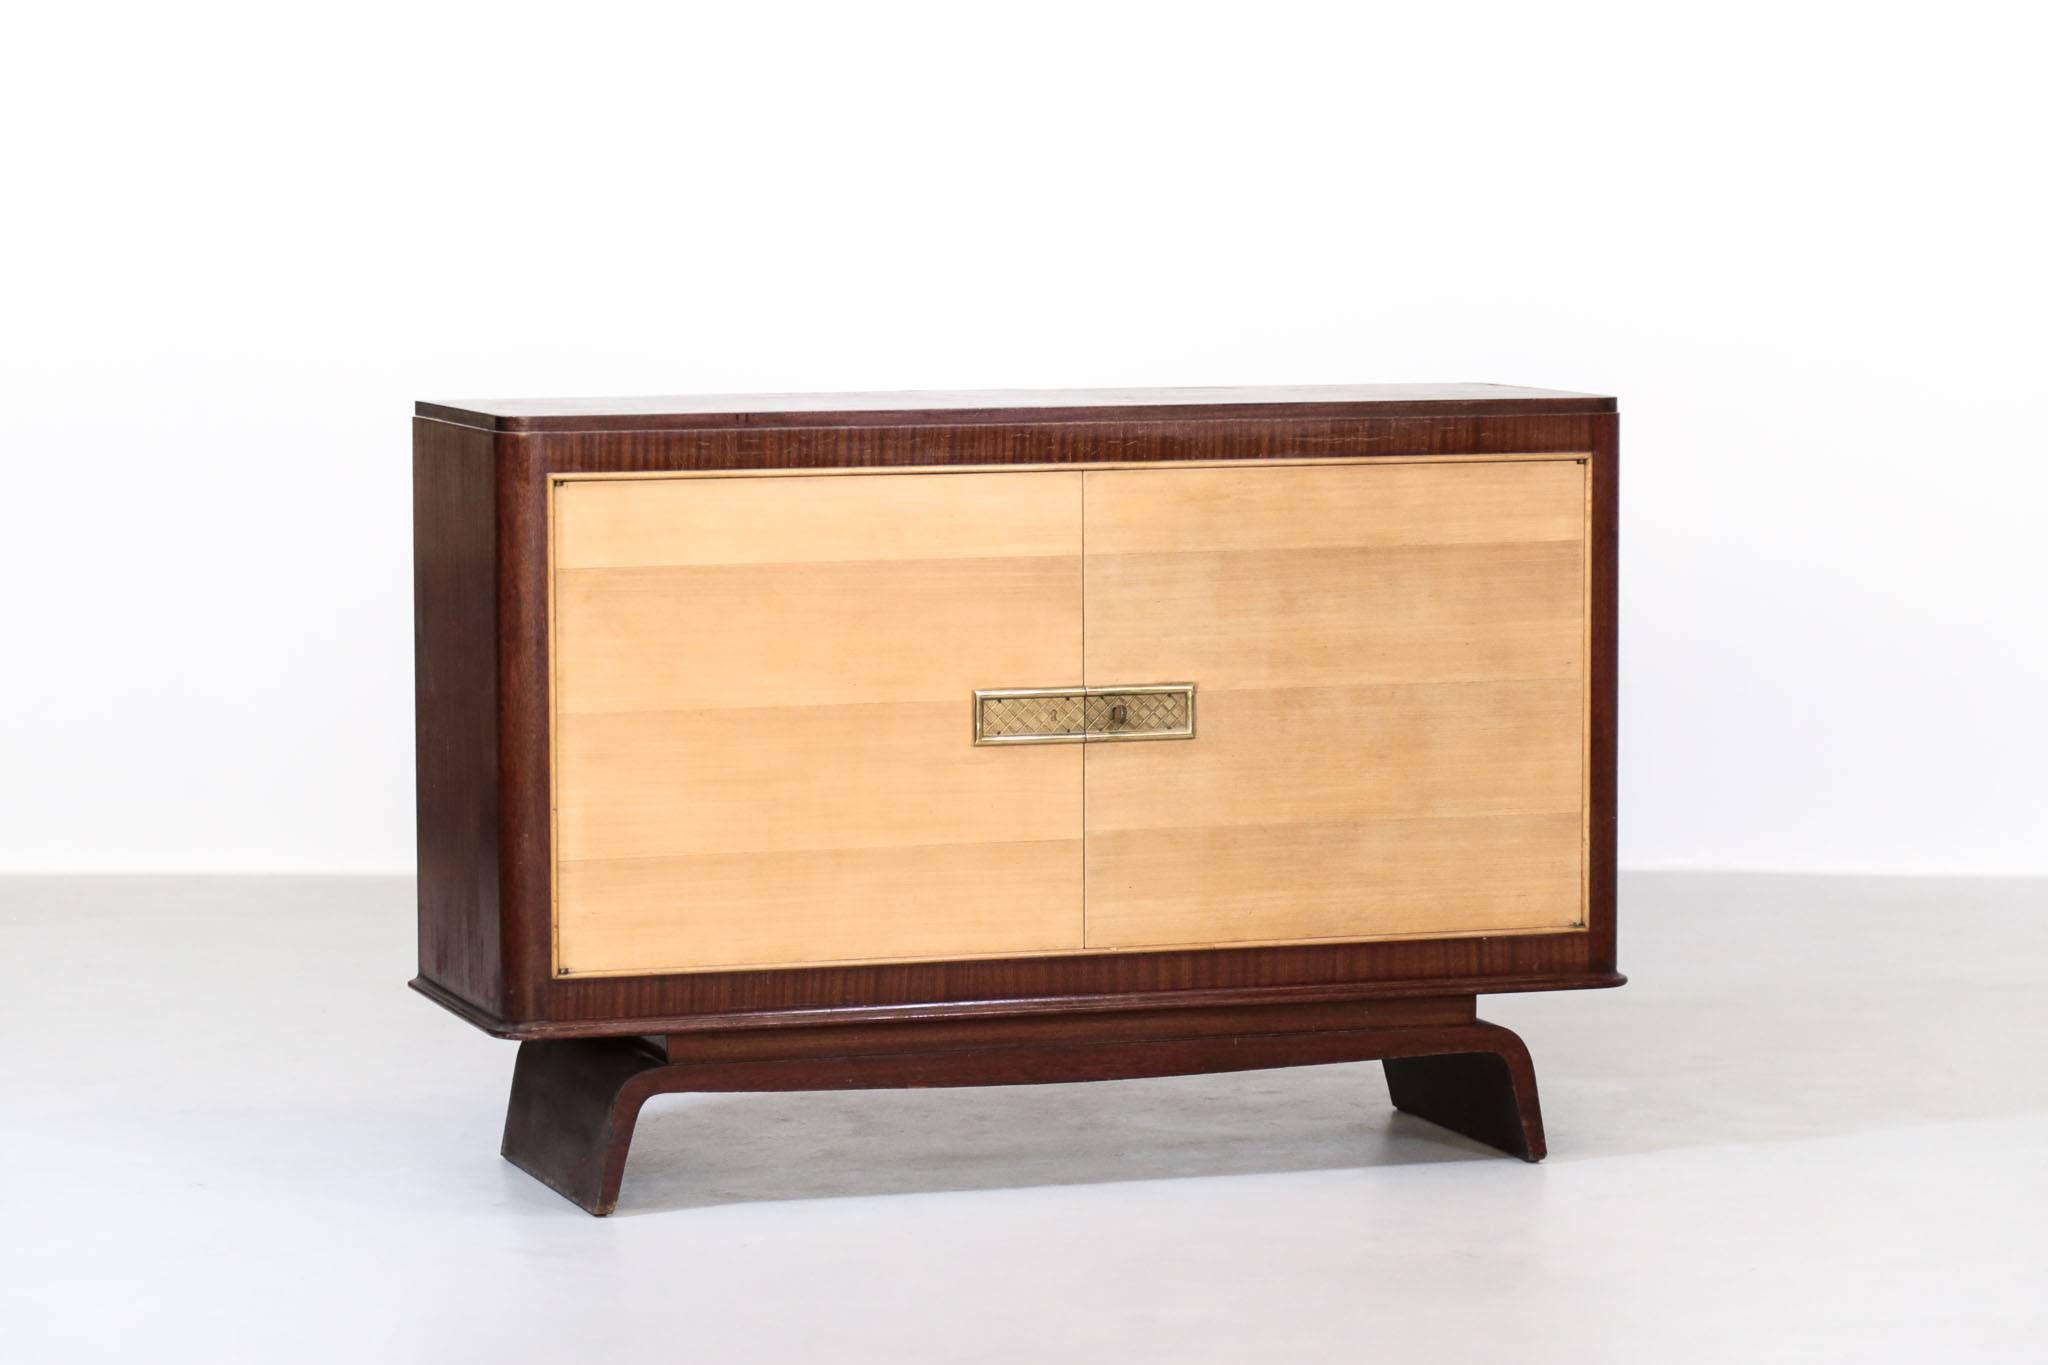 Attributed to Jean Desnos.
Made of mahogany and sycamore.